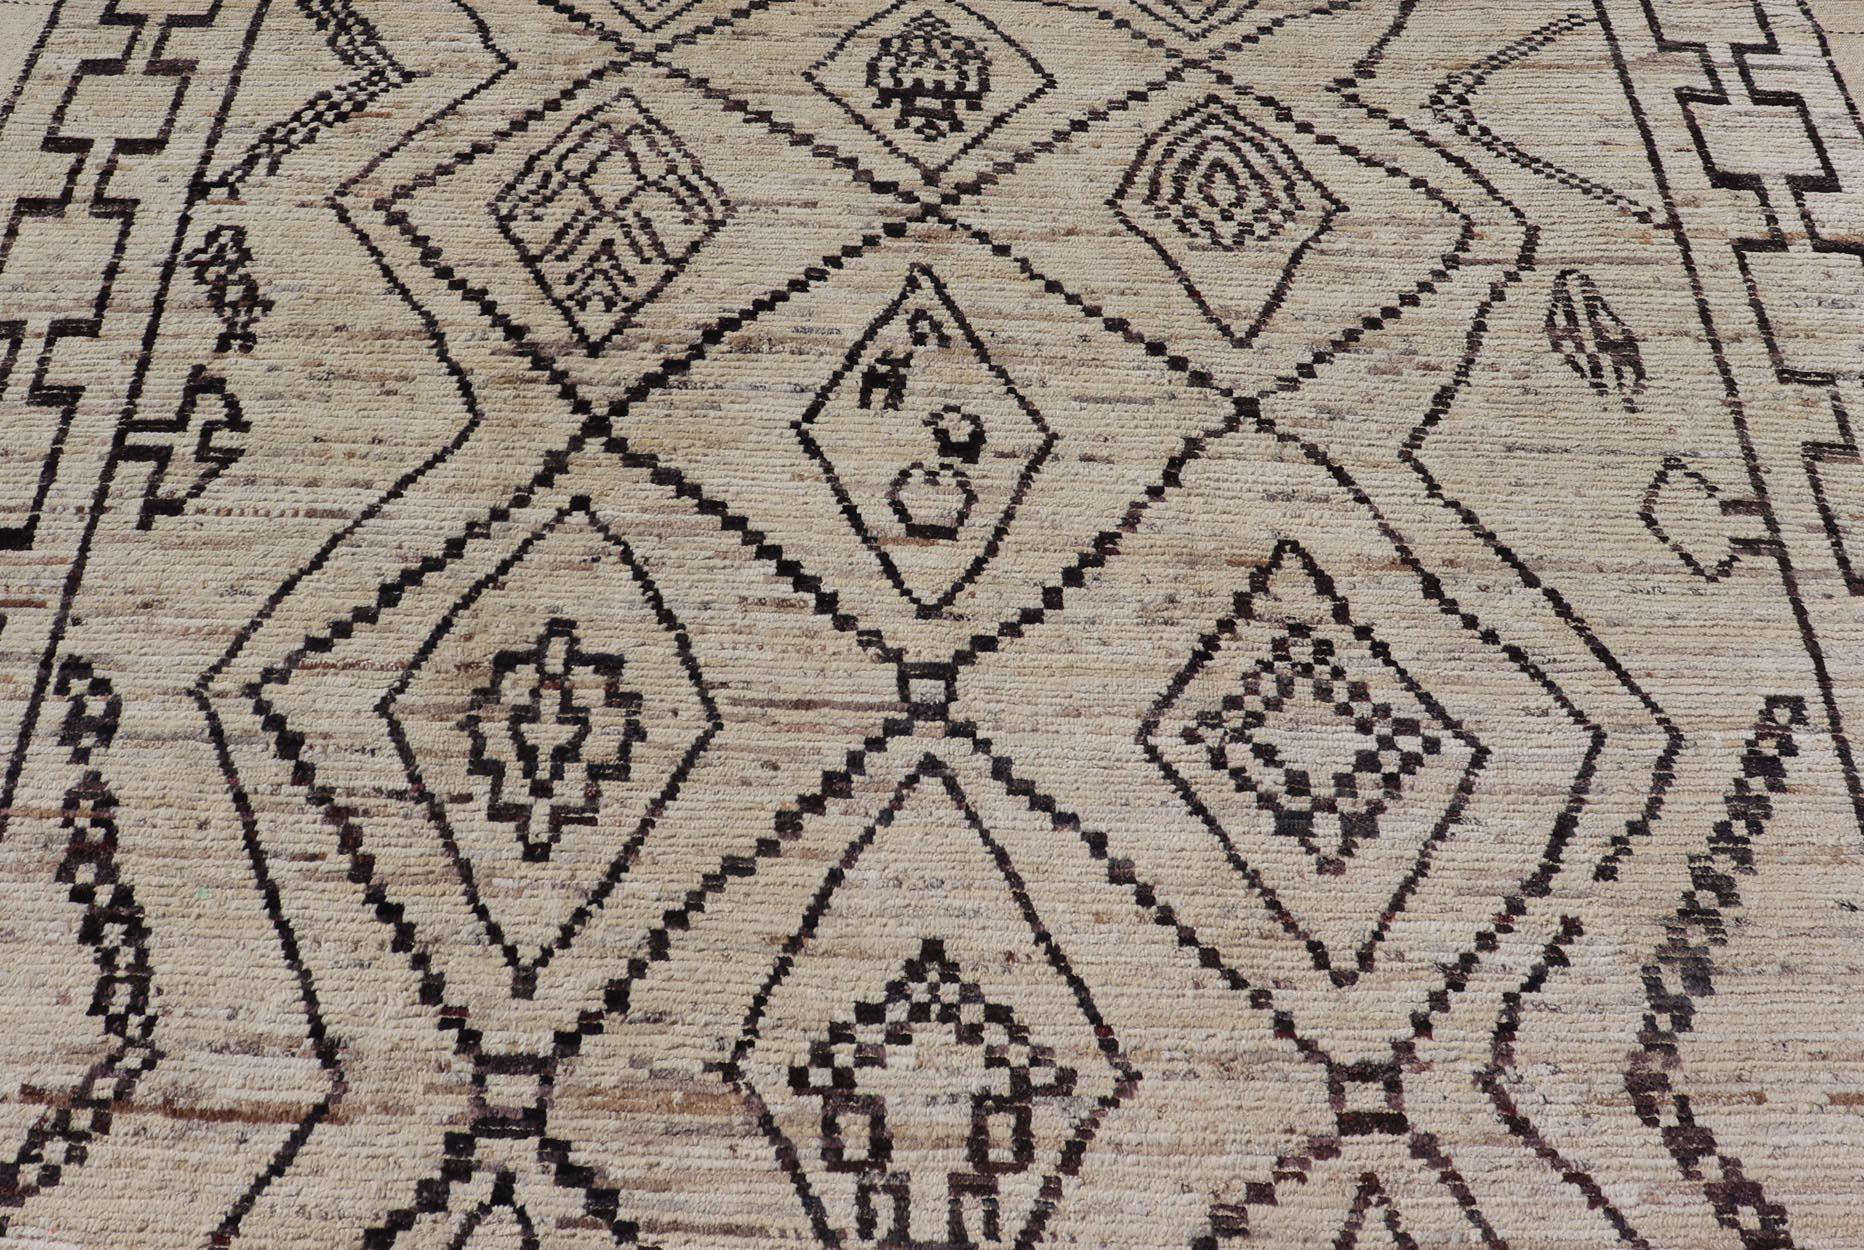 Keivan Woven Arts Hand-Knotted Wool Moroccan Rug in Cream and D. Brown. This modern casual tribal Moroccan rug has been hand-knotted in wool. The rug features a modern sub-geometric design, replete with various motifs. The rug is rendered in cream